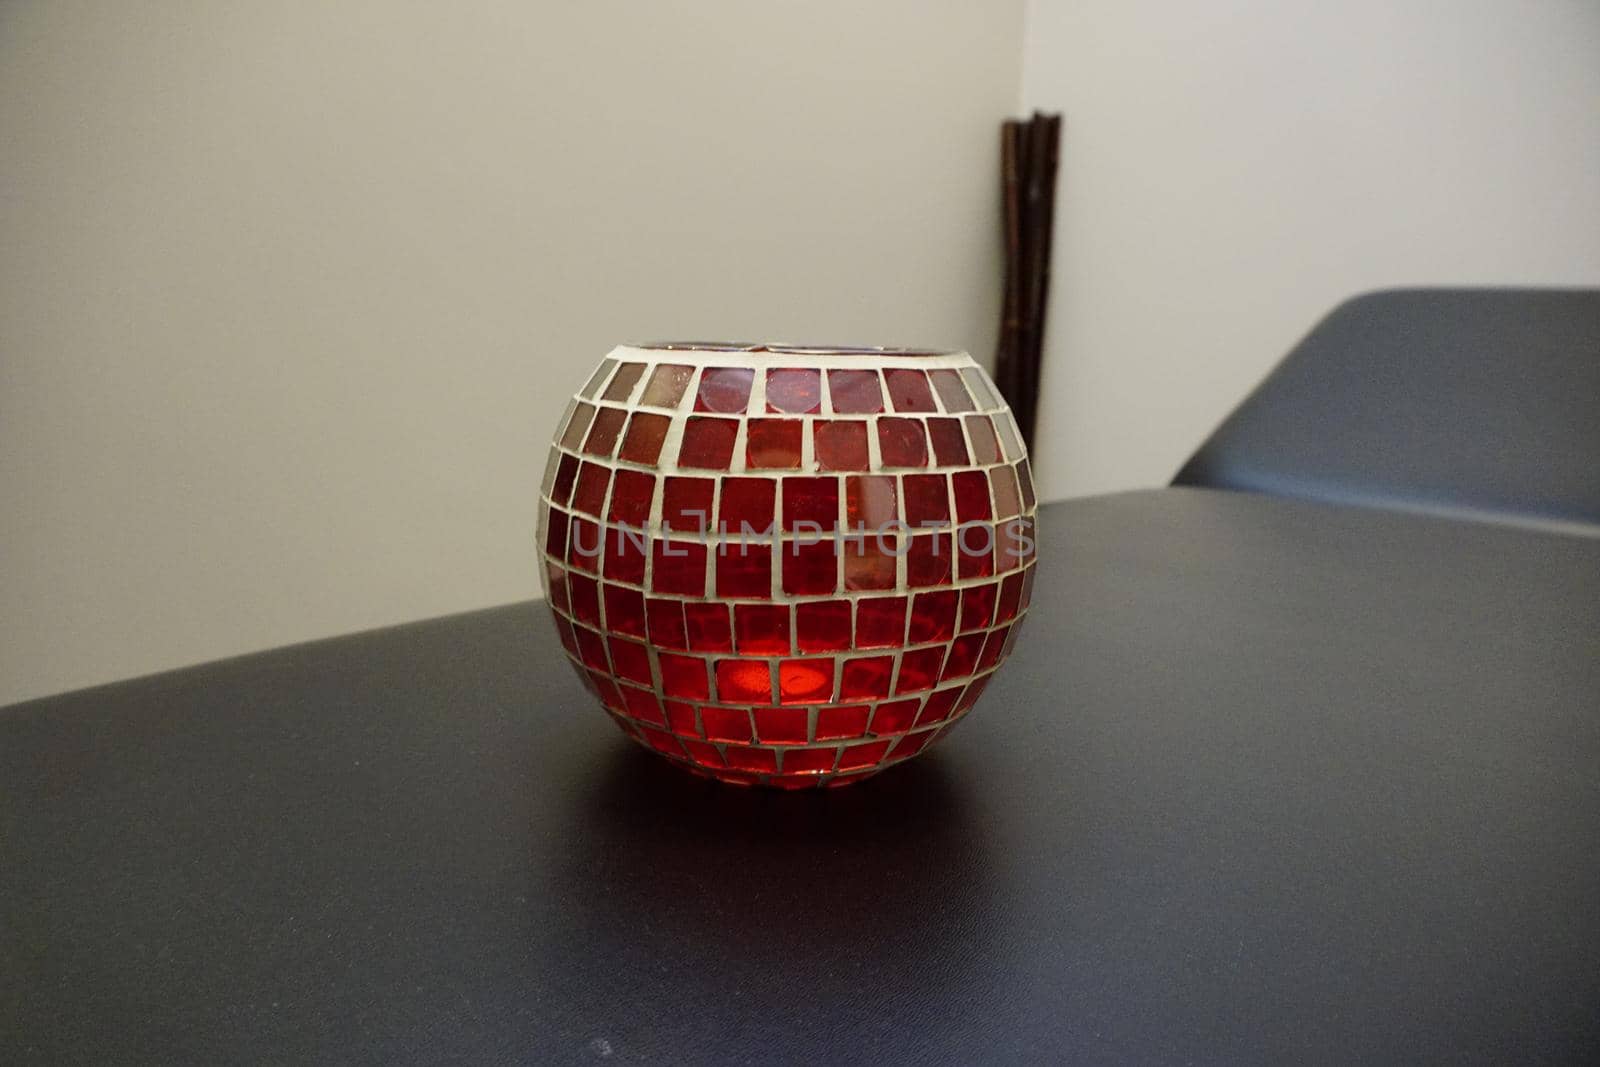 glass sphere decoration covered with red glass mosaic. High quality photo